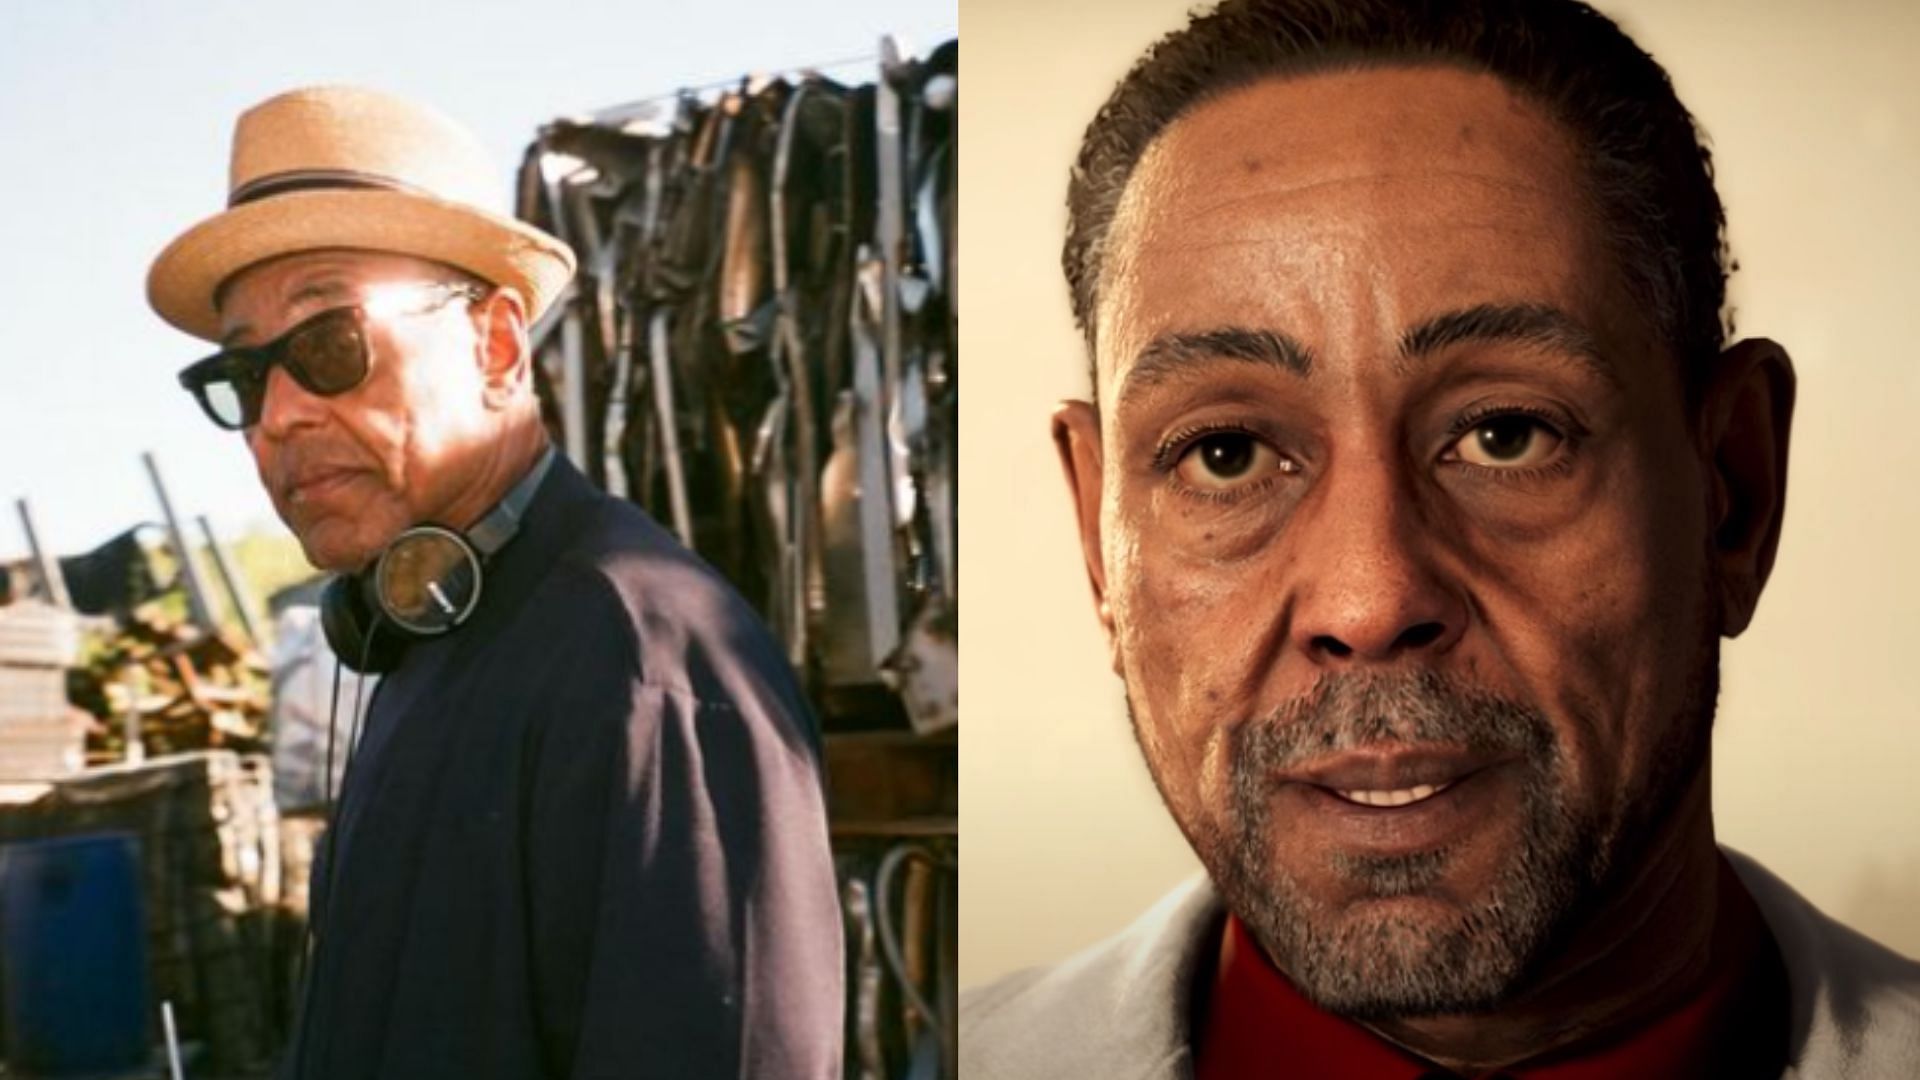 The Far Cry 6 villain was disappointing (Images via Instagram/thegiancarloesposito, Ubisoft)